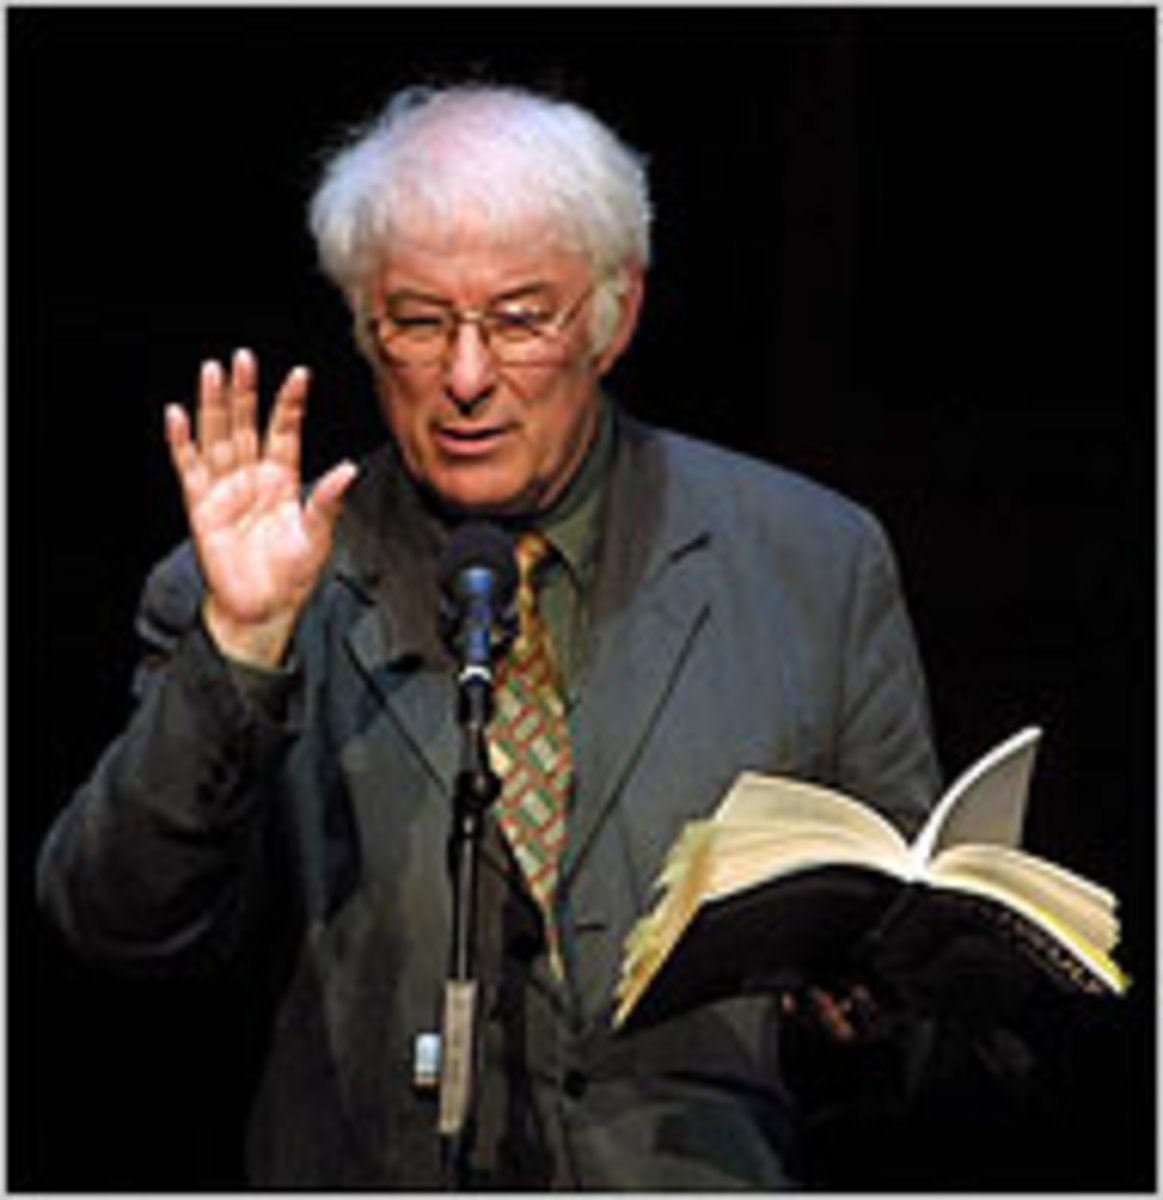 valediction-by-seamus-heaney-an-analysis